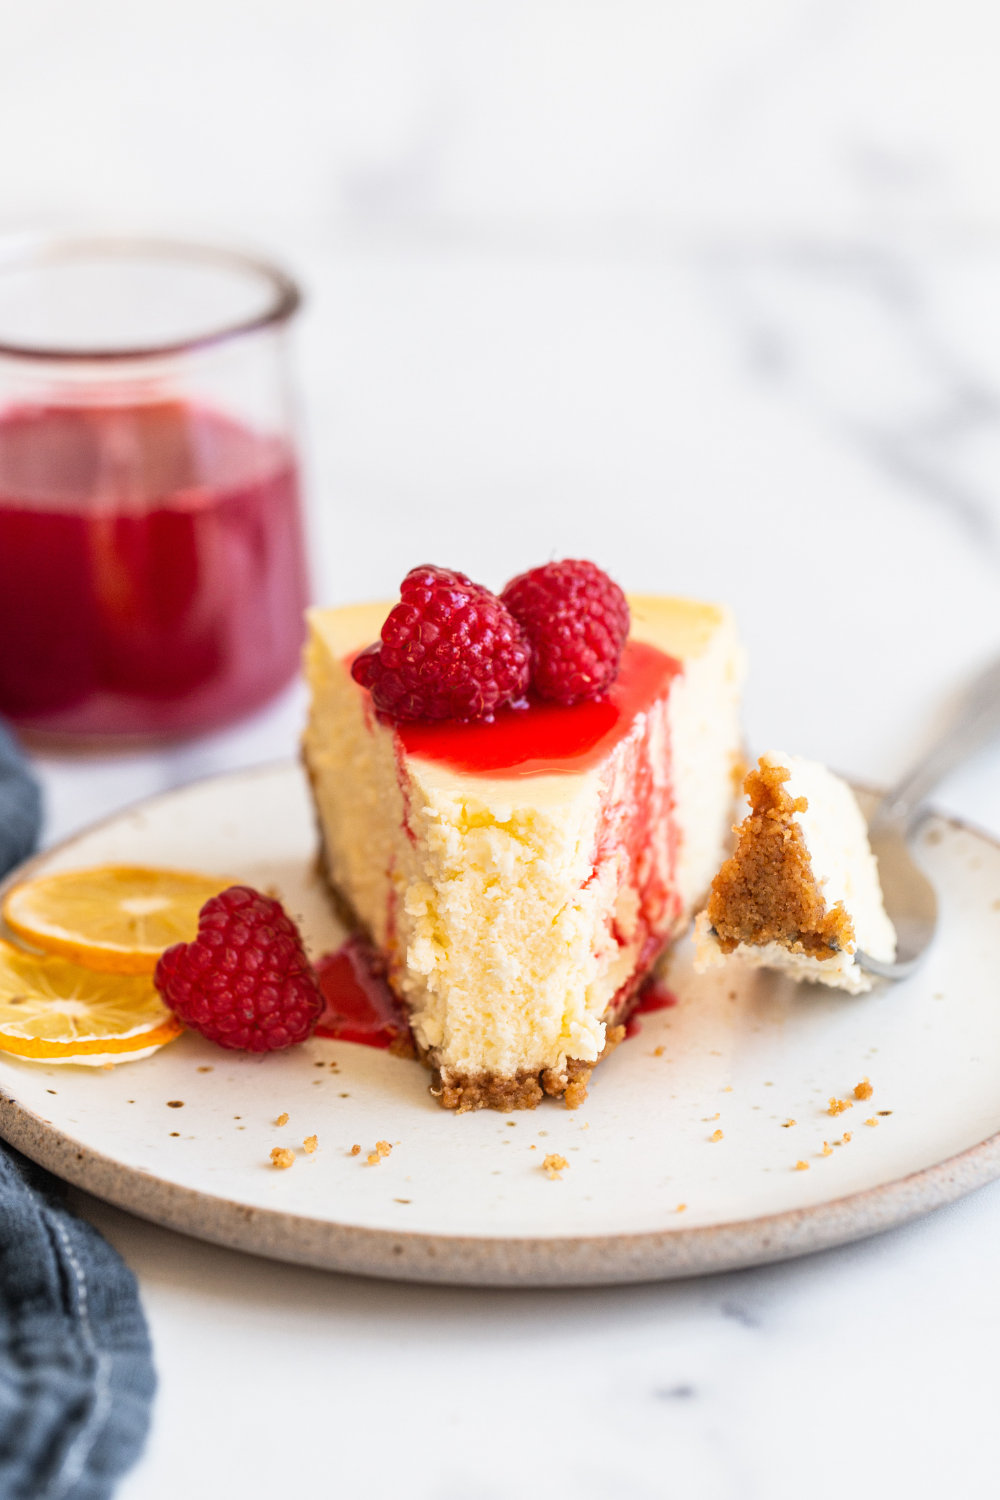 slice of cheesecake with a bite taken out, topped with raspberry sauce and fresh raspberries, on a plate, ready to be enjoyed